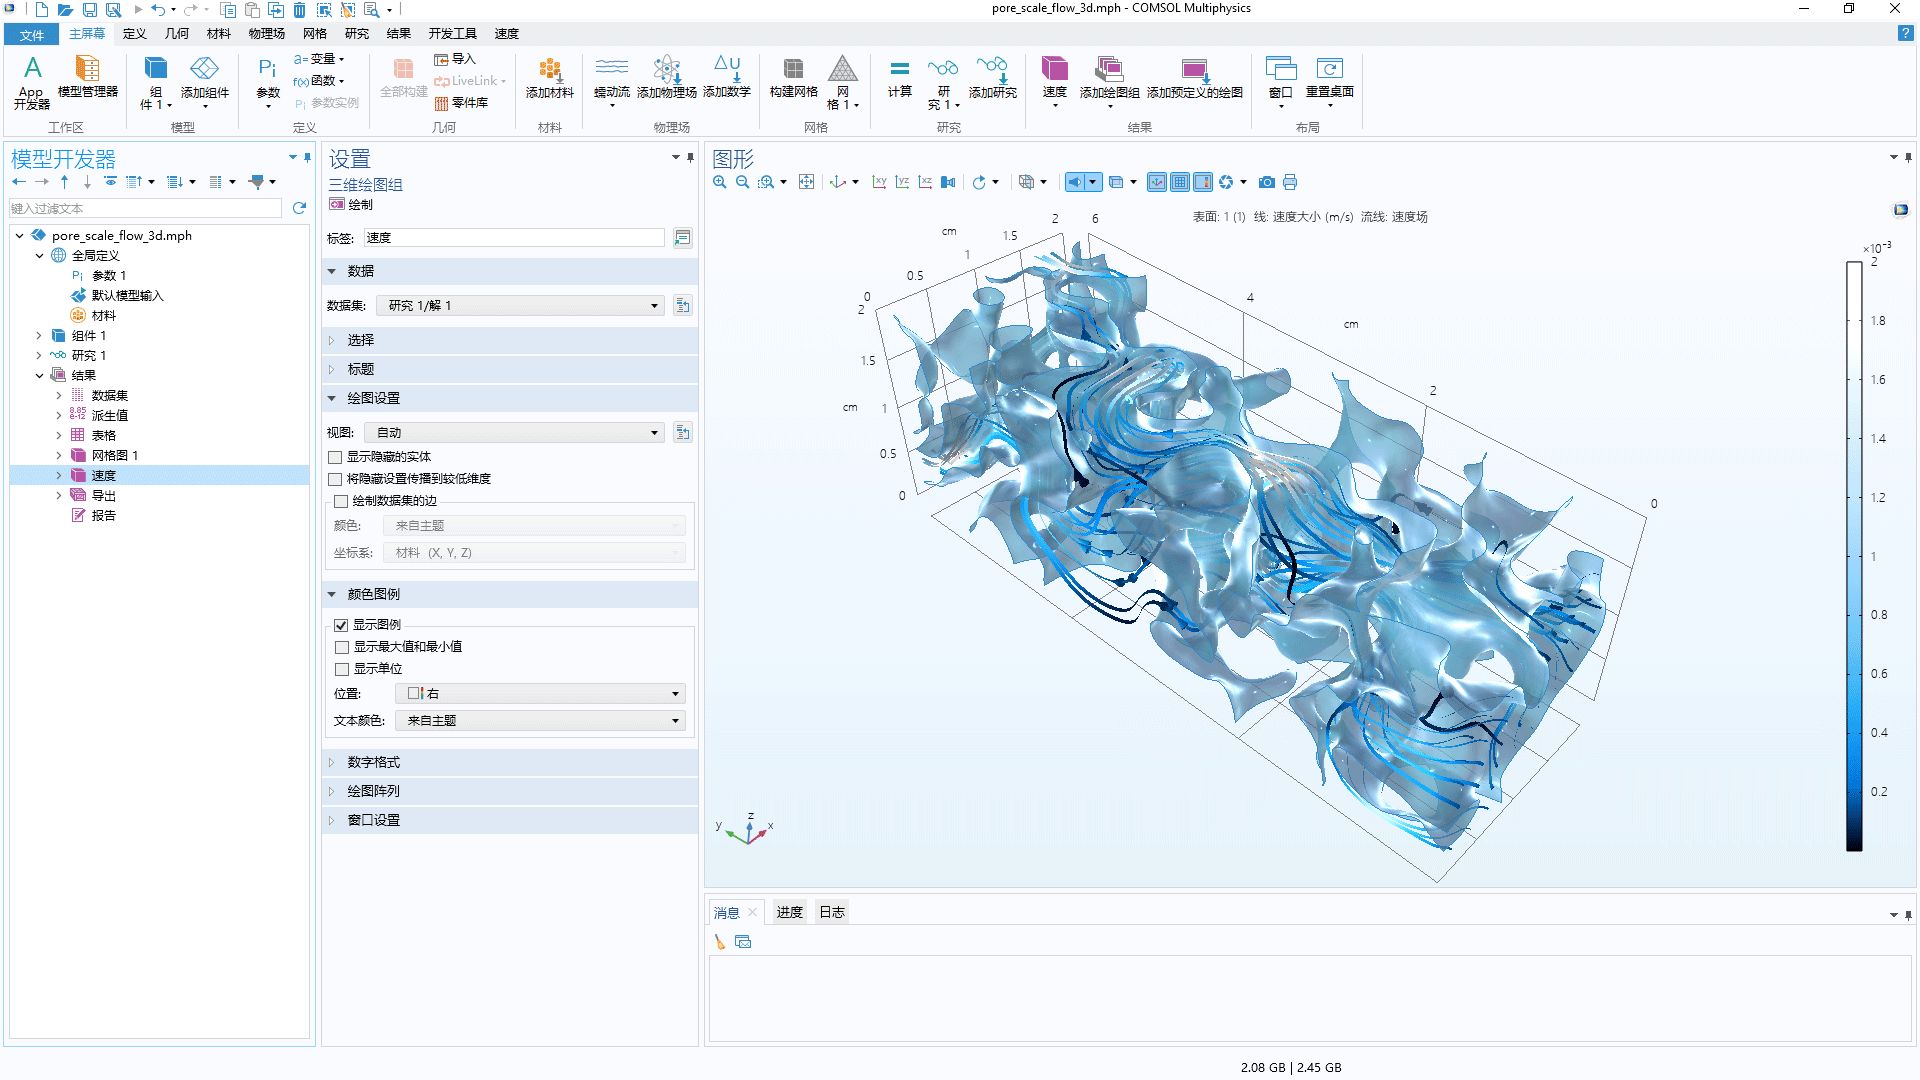 The COMSOL Multiphysics UI showing the language in Chinese, Simplified.